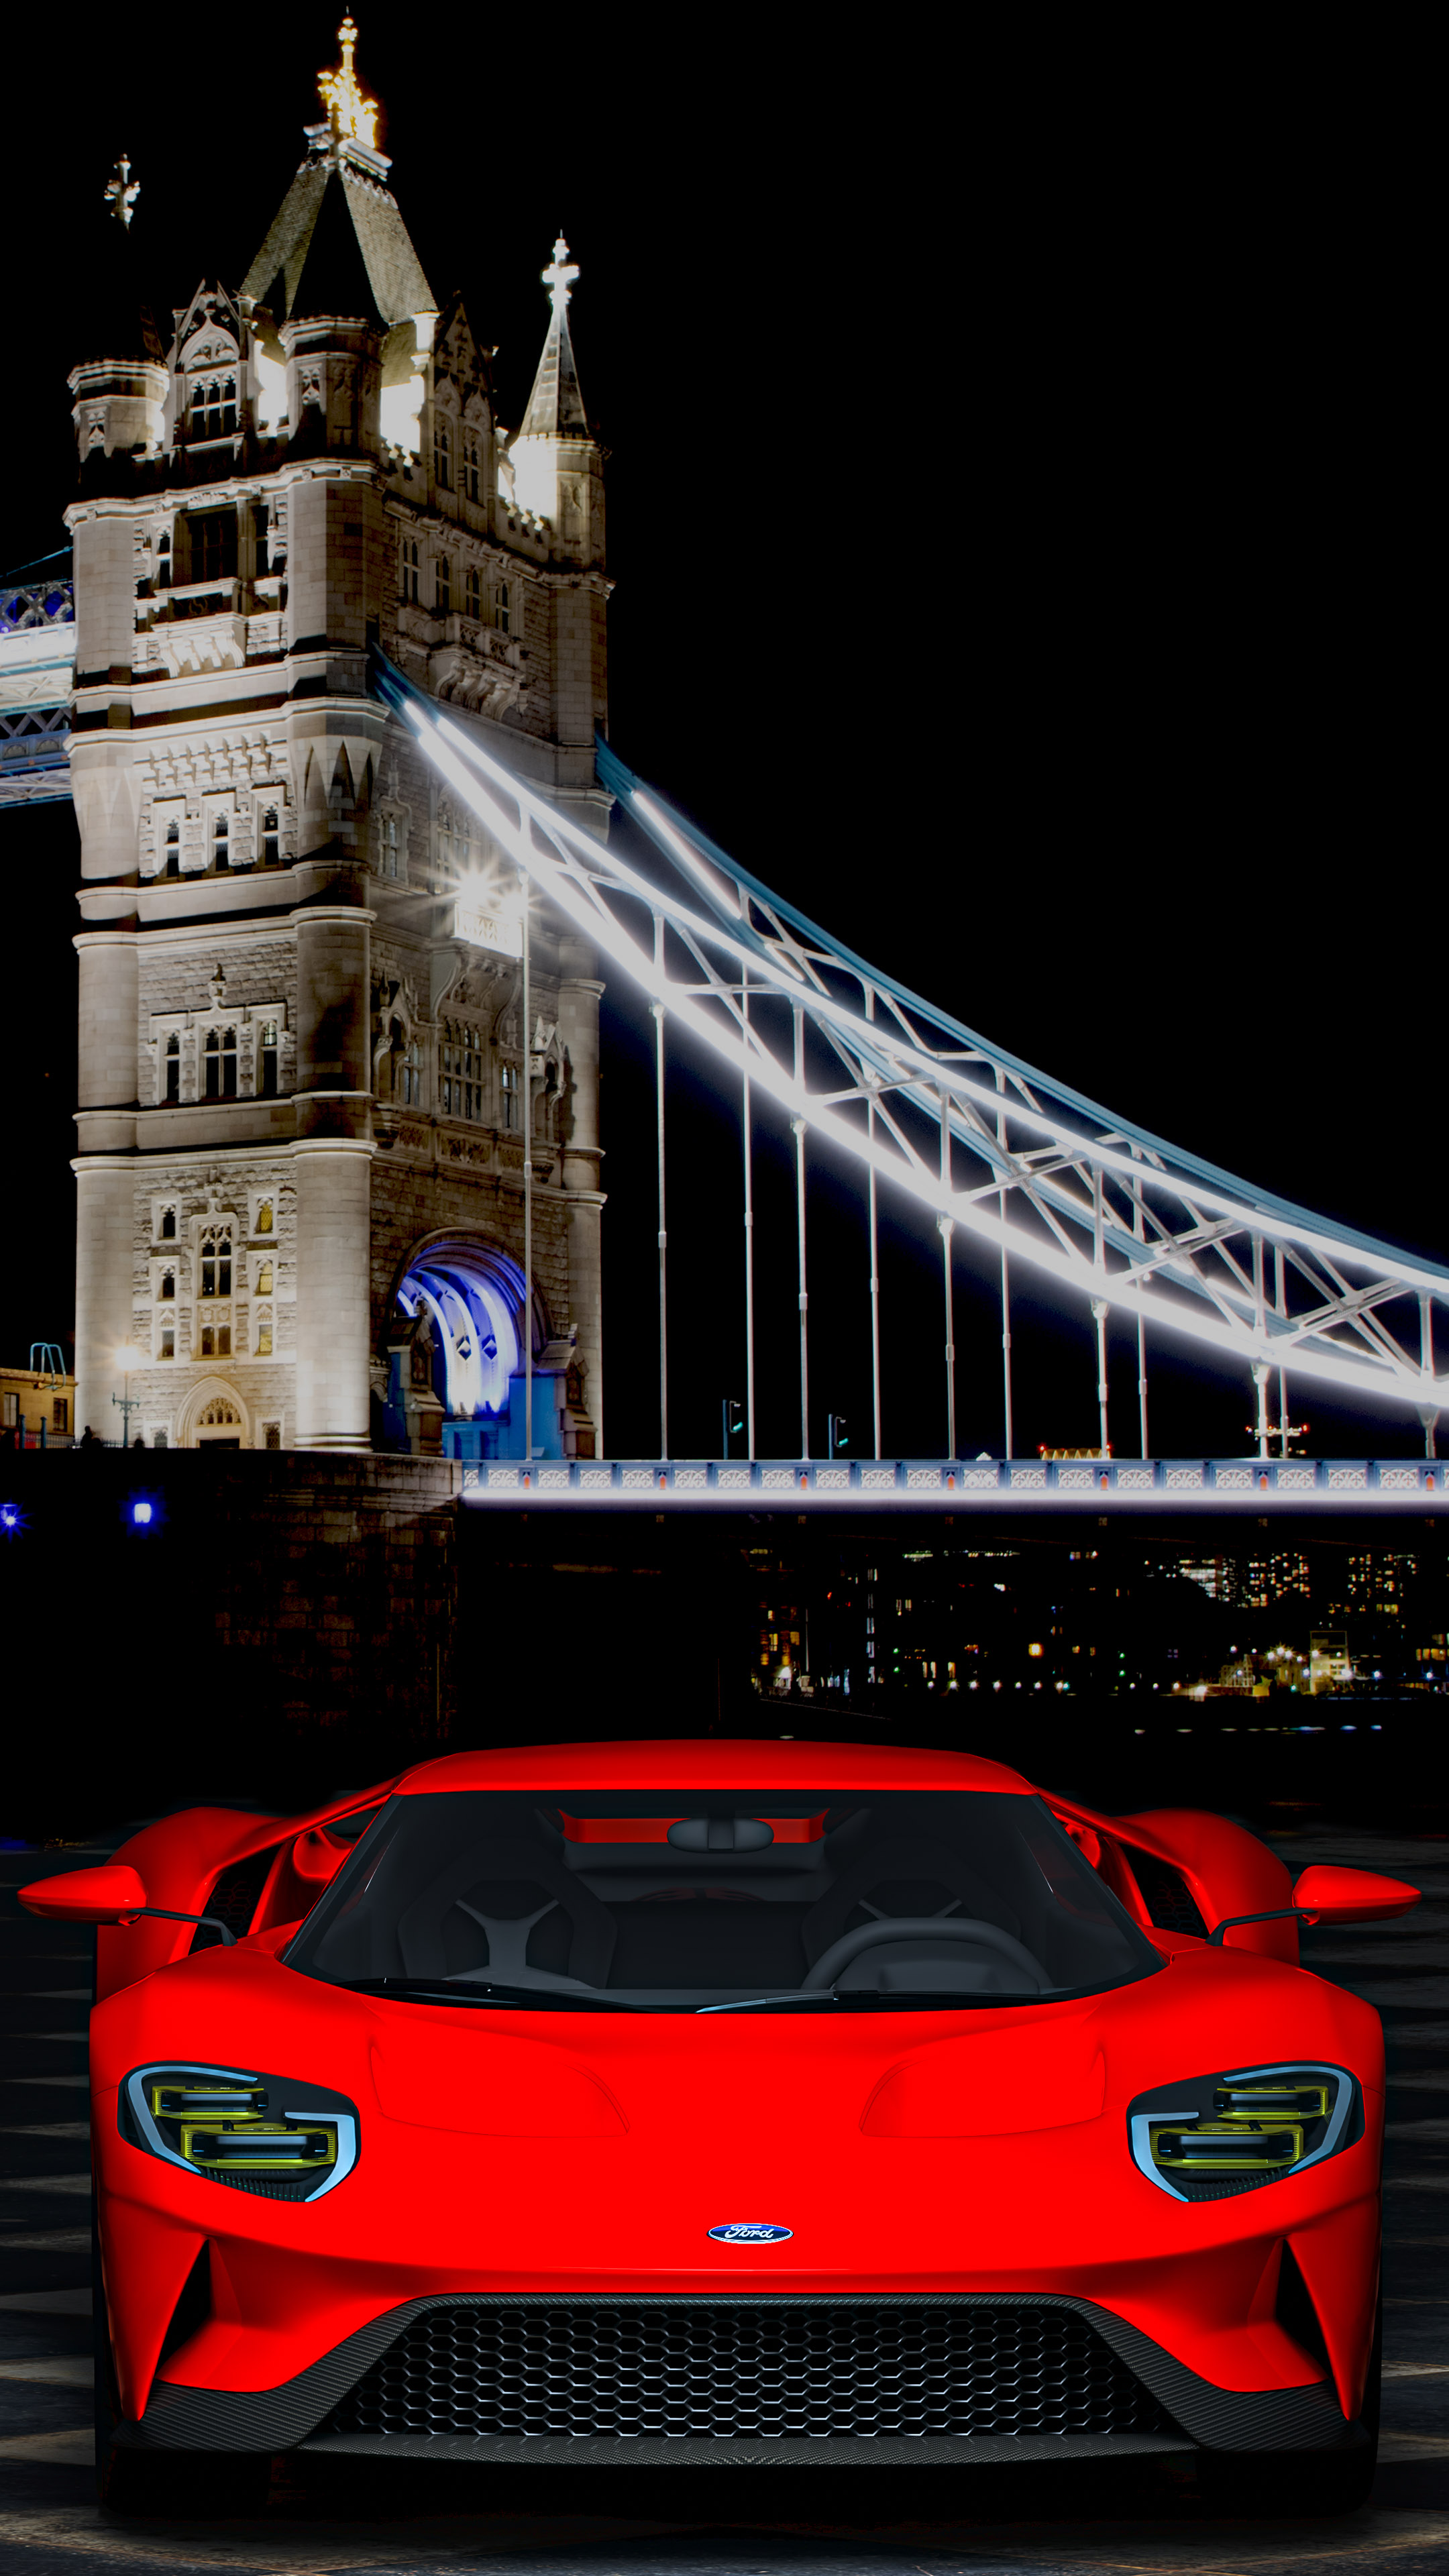 Adorn your phone with the vibrant red Ford GT, experiencing high-quality car wallpapers that elevate the visual appeal of your device.